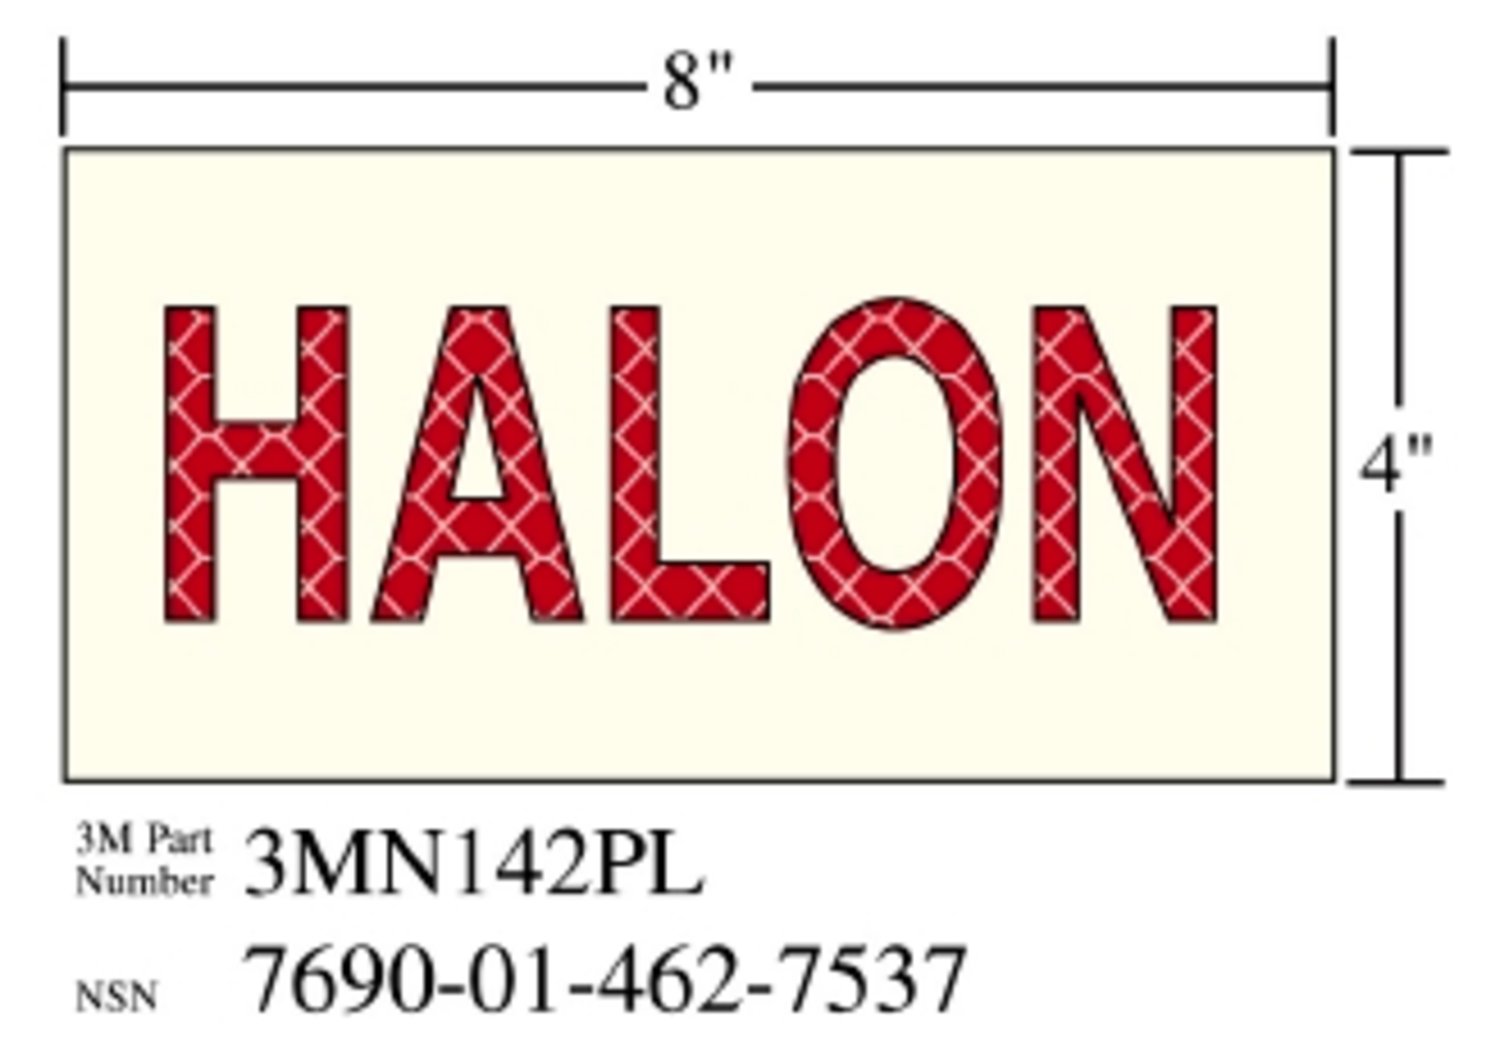 7010389825 - 3M Photoluminescent Film 6900, Shipboard Sign 3MN142PL, 8 in x 4 in,
HALON, 10/Package